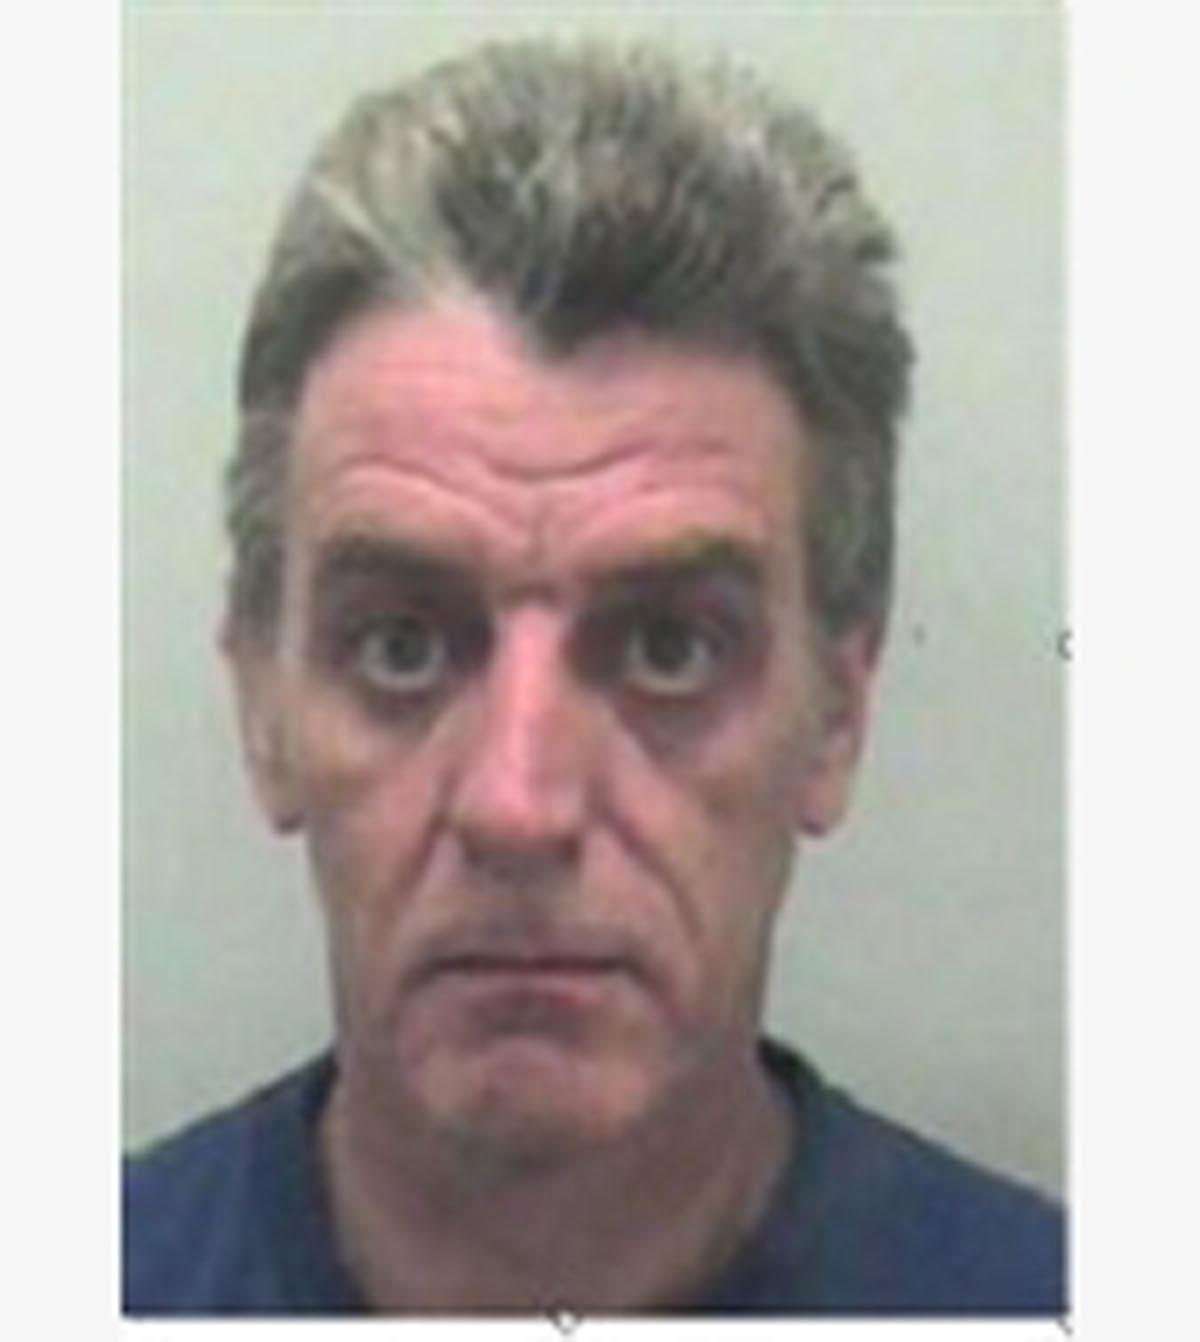 Anthony Harding is wanted for an arson attack in North Road, Brighton, on August 5, 2004. He also failed to appear at Lewes Crown Court in December 2005. Harding is Welsh. 